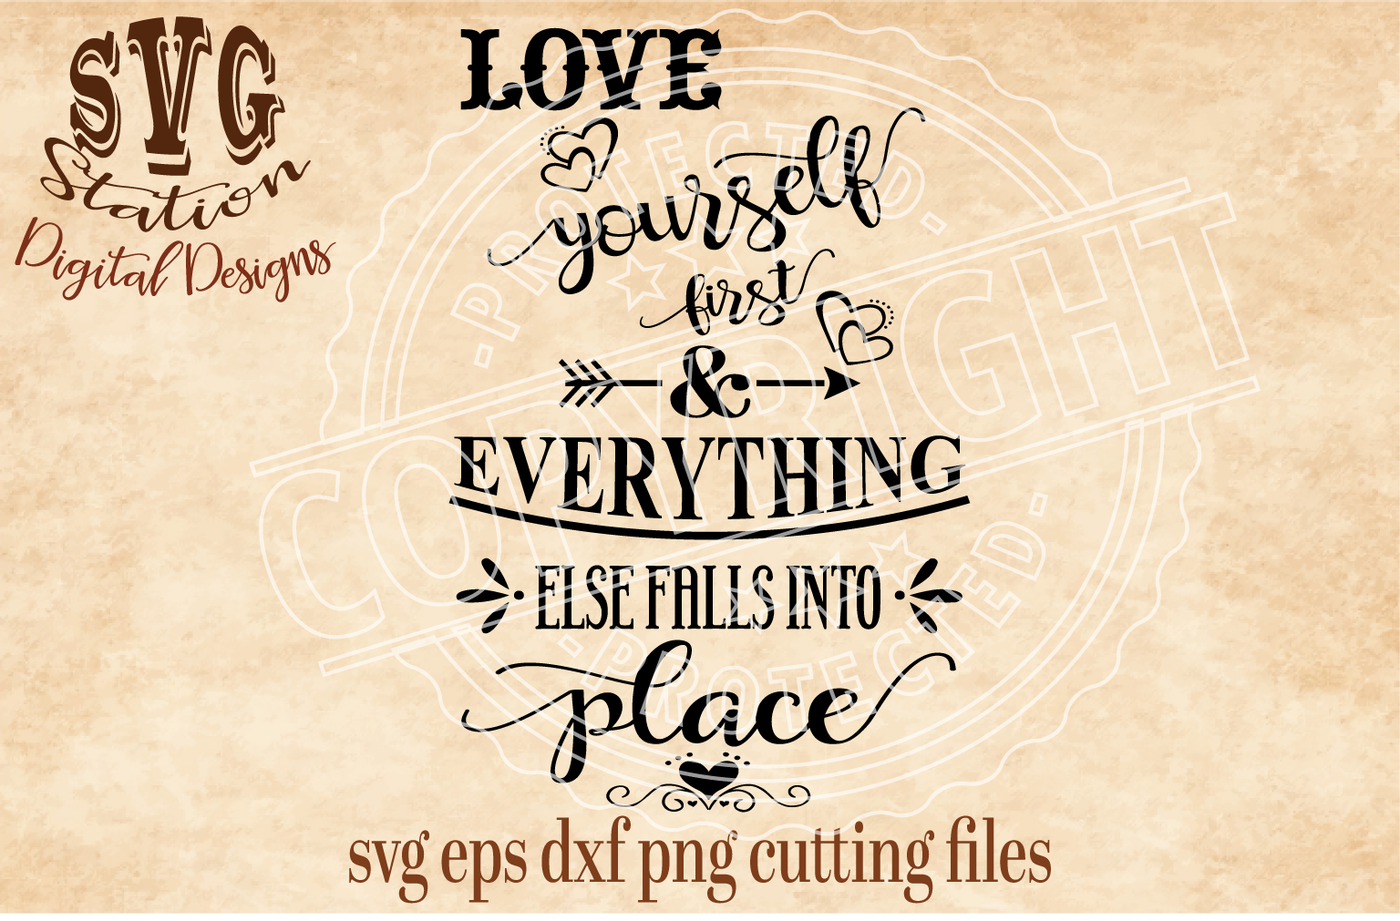 Love Yourself First And Everything Else Falls Into Place Svg Dxf Png Eps Cutting File Silhouette Cricut By Svg Station Thehungryjpeg Com